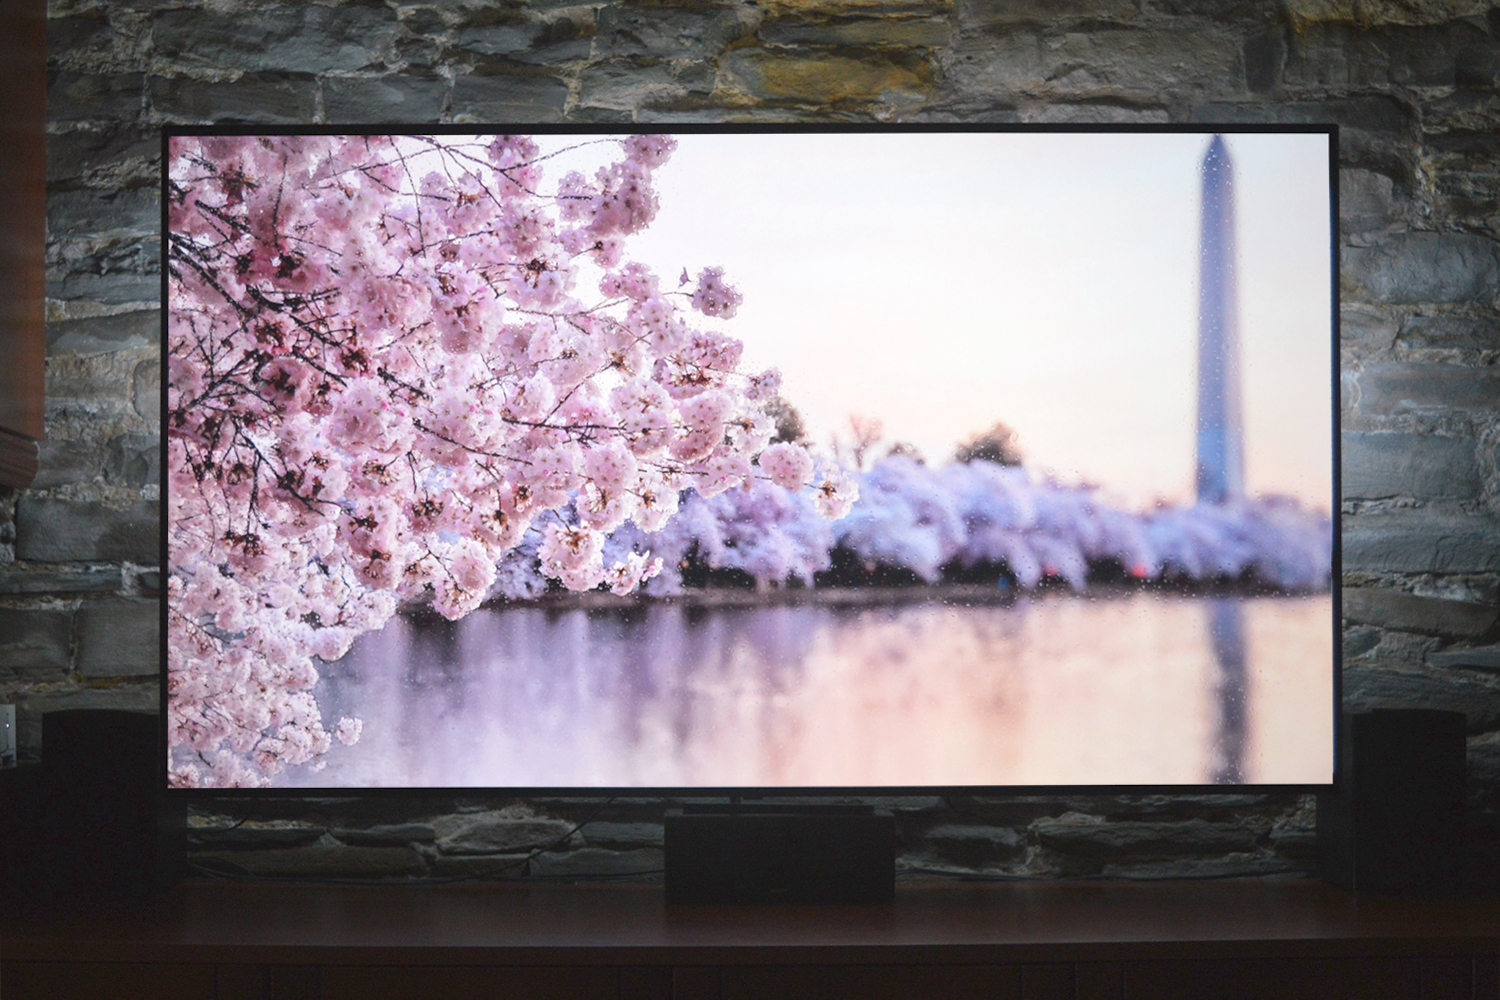 What is bias lighting and how can it improve TV | Digital Trends